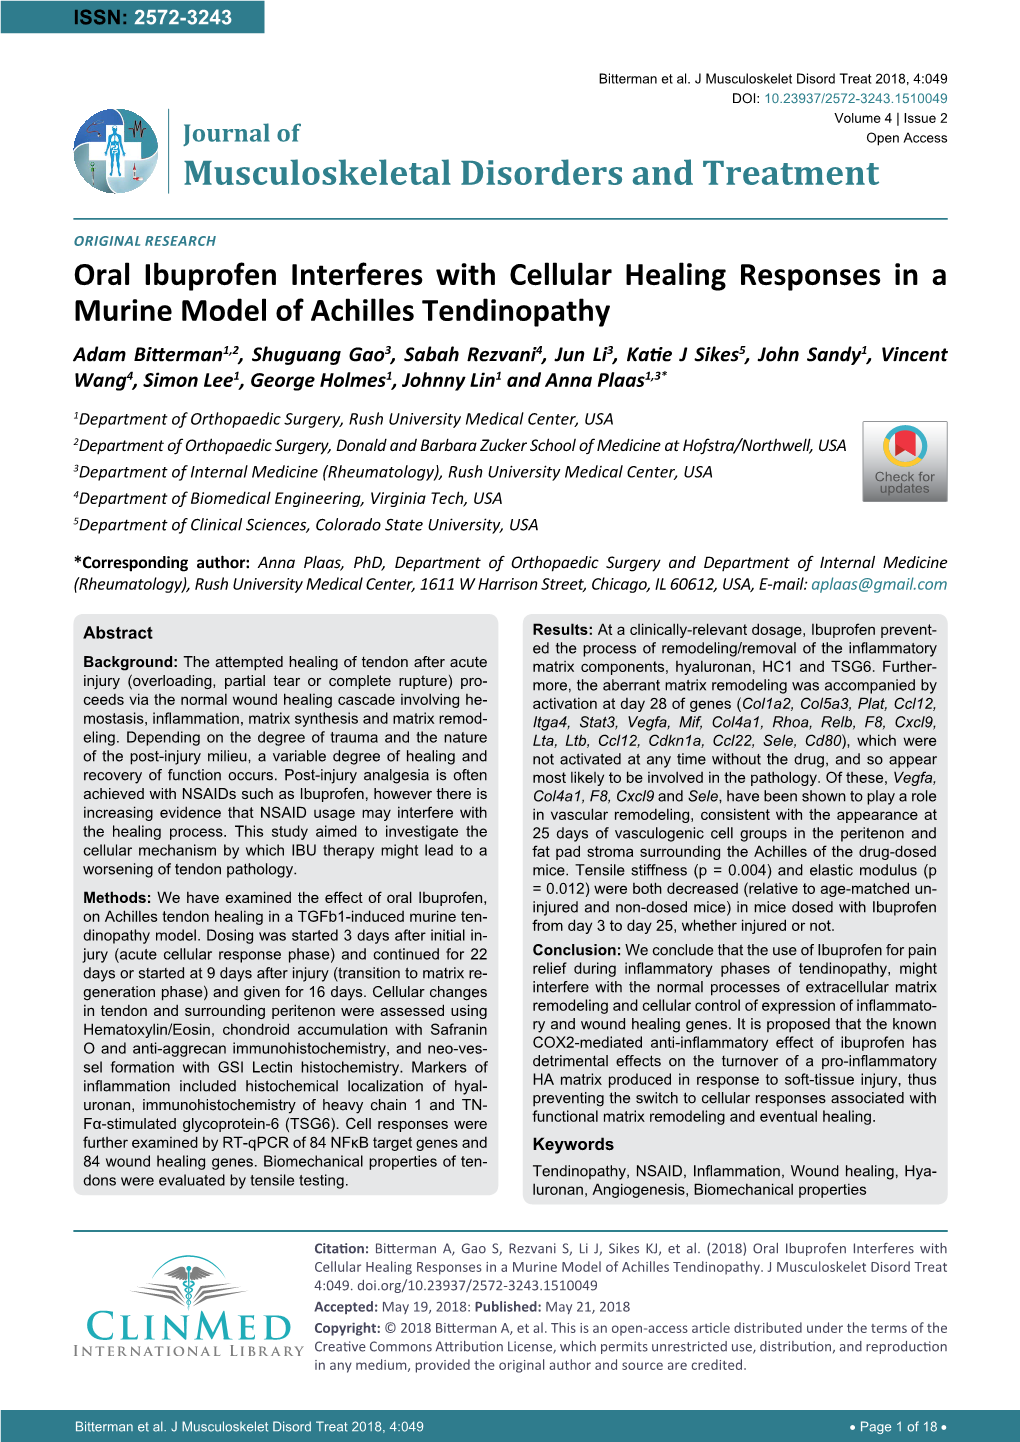 Oral Ibuprofen Interferes with Cellular Healing Responses in a Murine